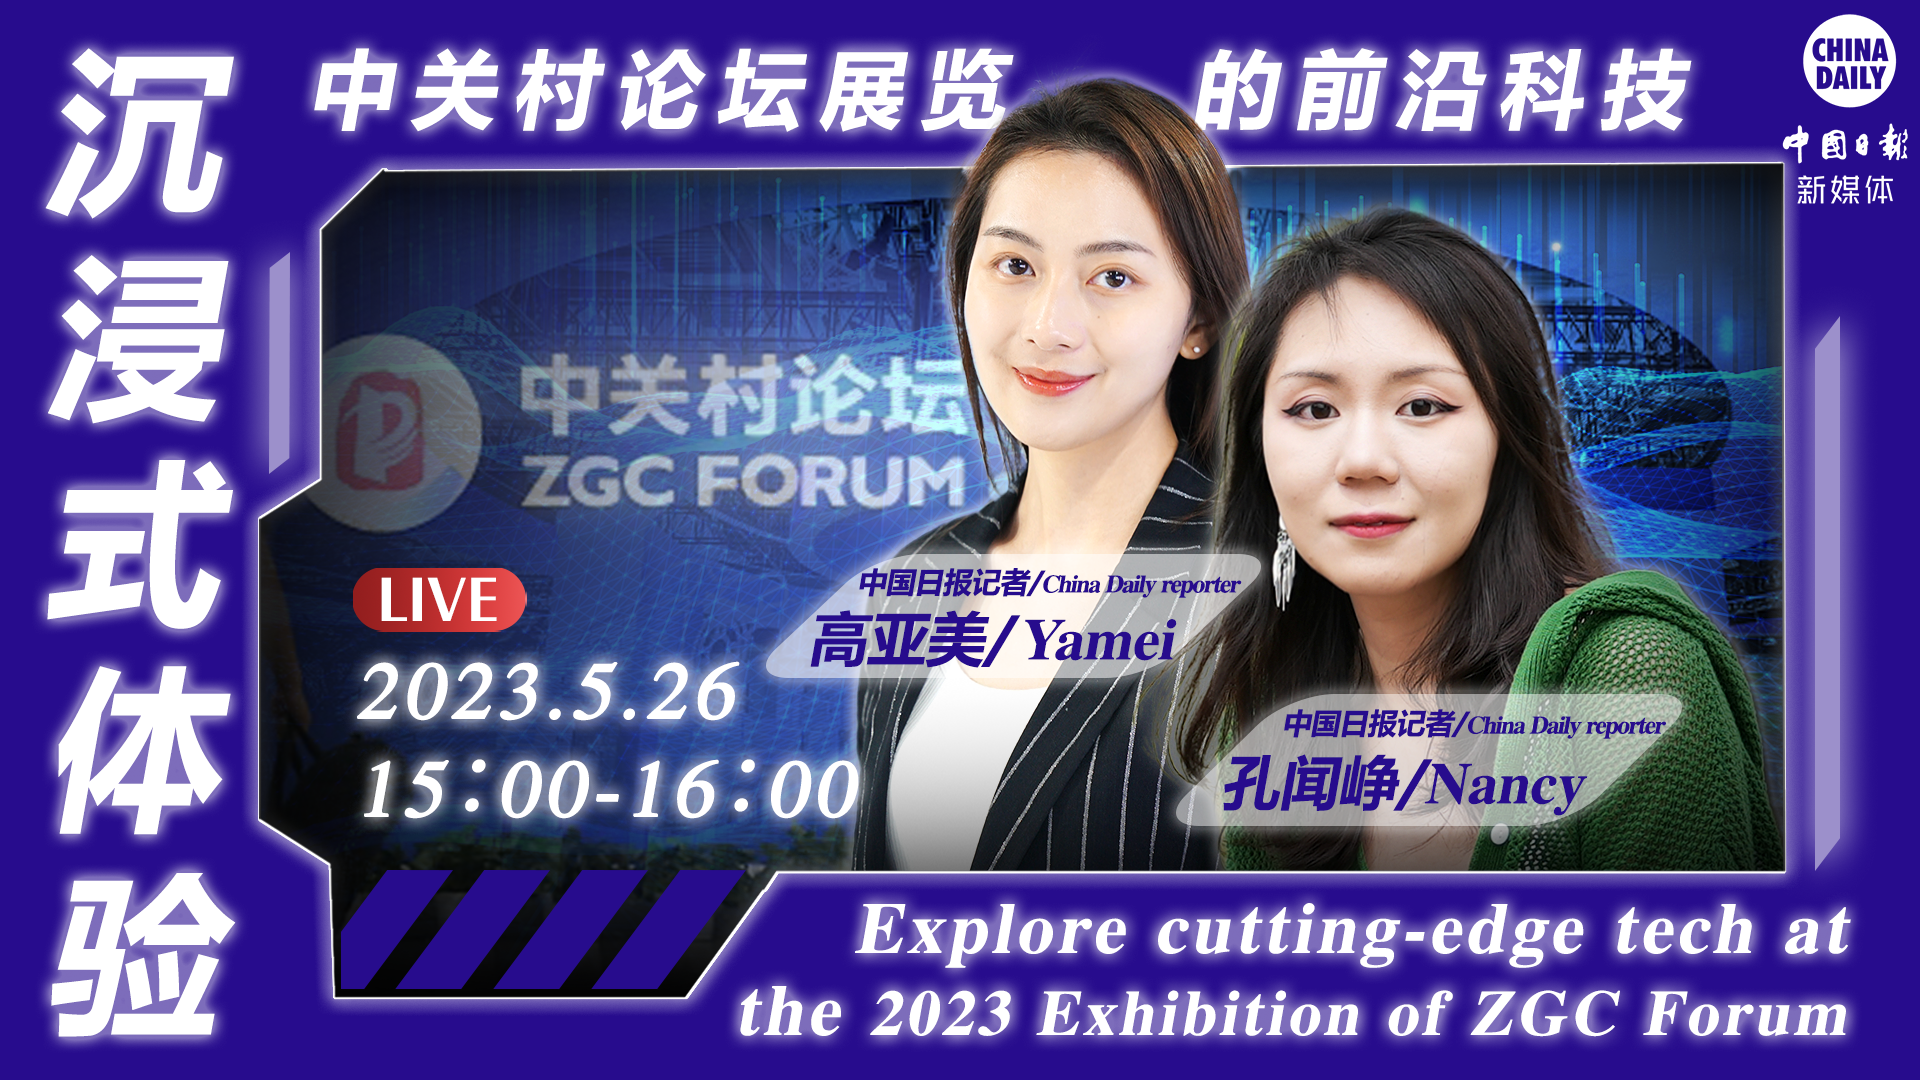 Watch it again: Immersive experience in 2023 Exhibition of ZGC Forum